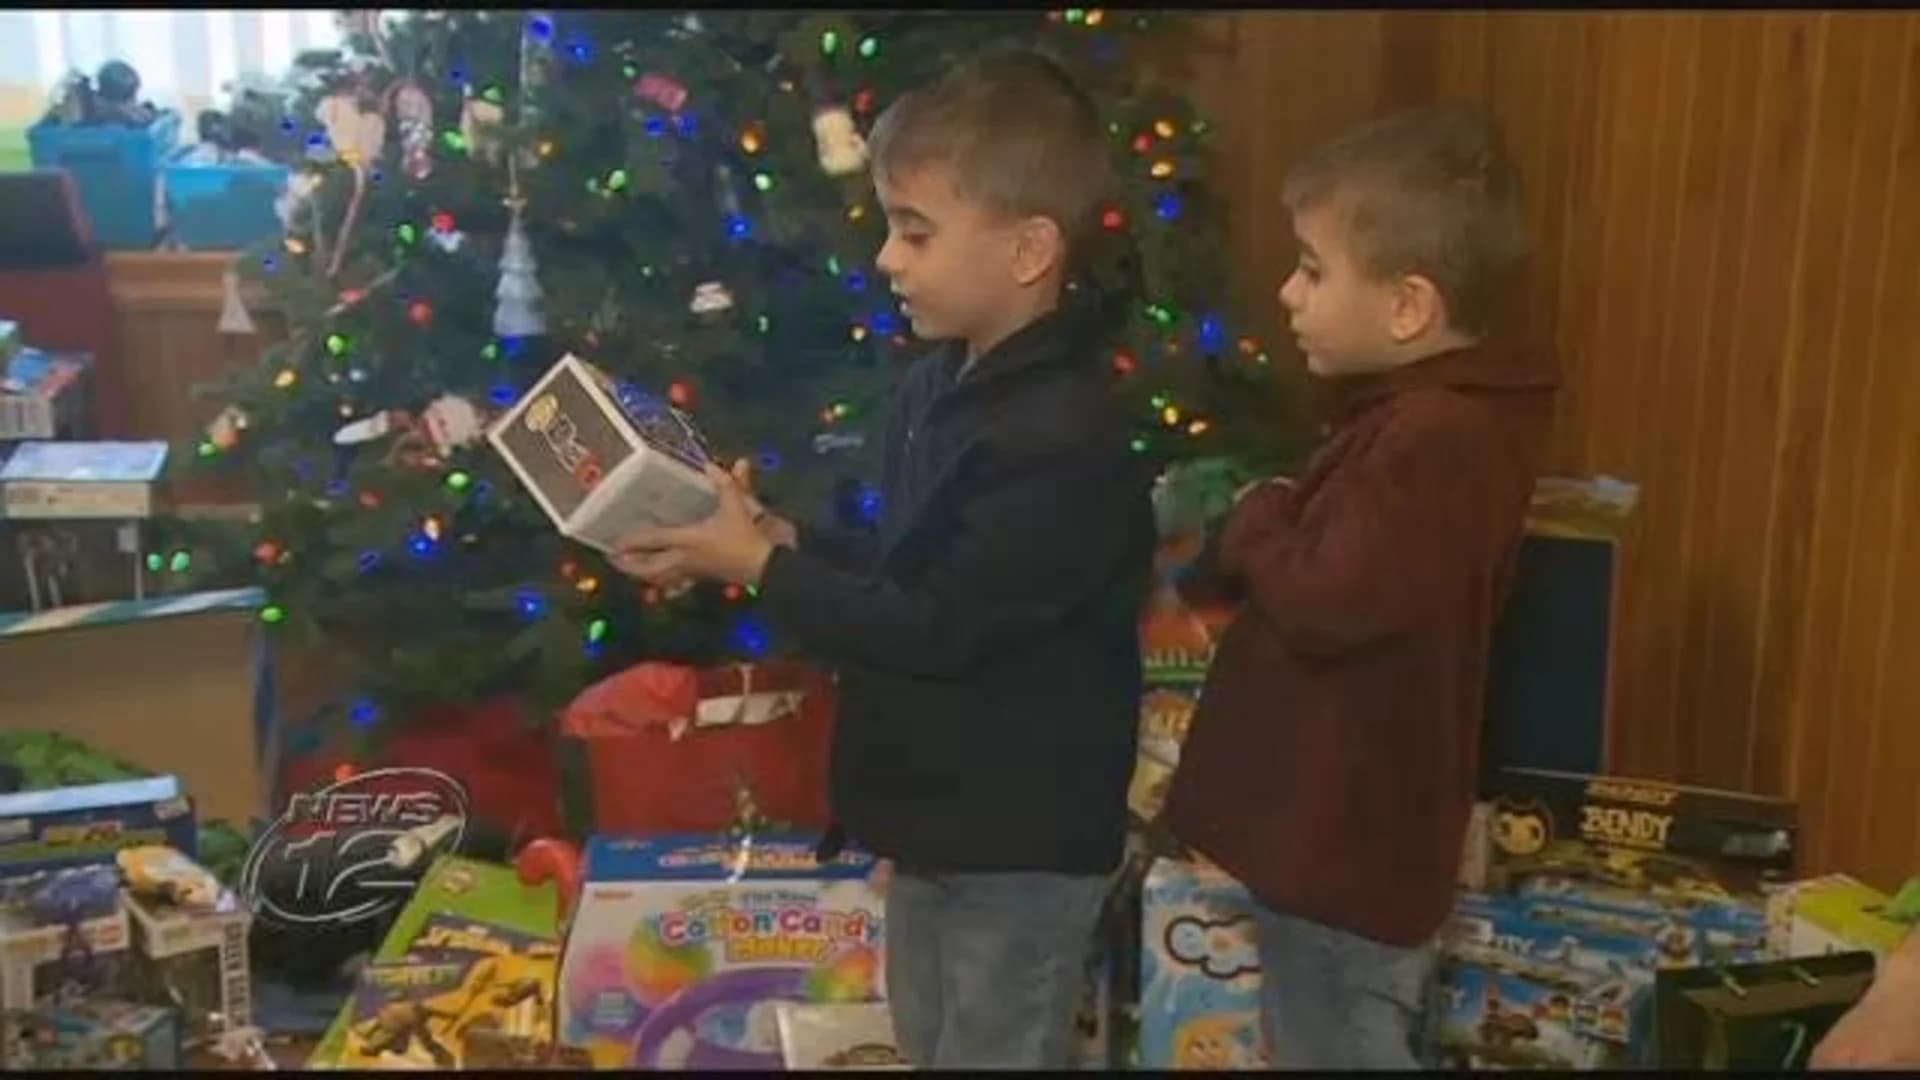 Community rallies to give holiday gifts to twins as mother recovers from coma